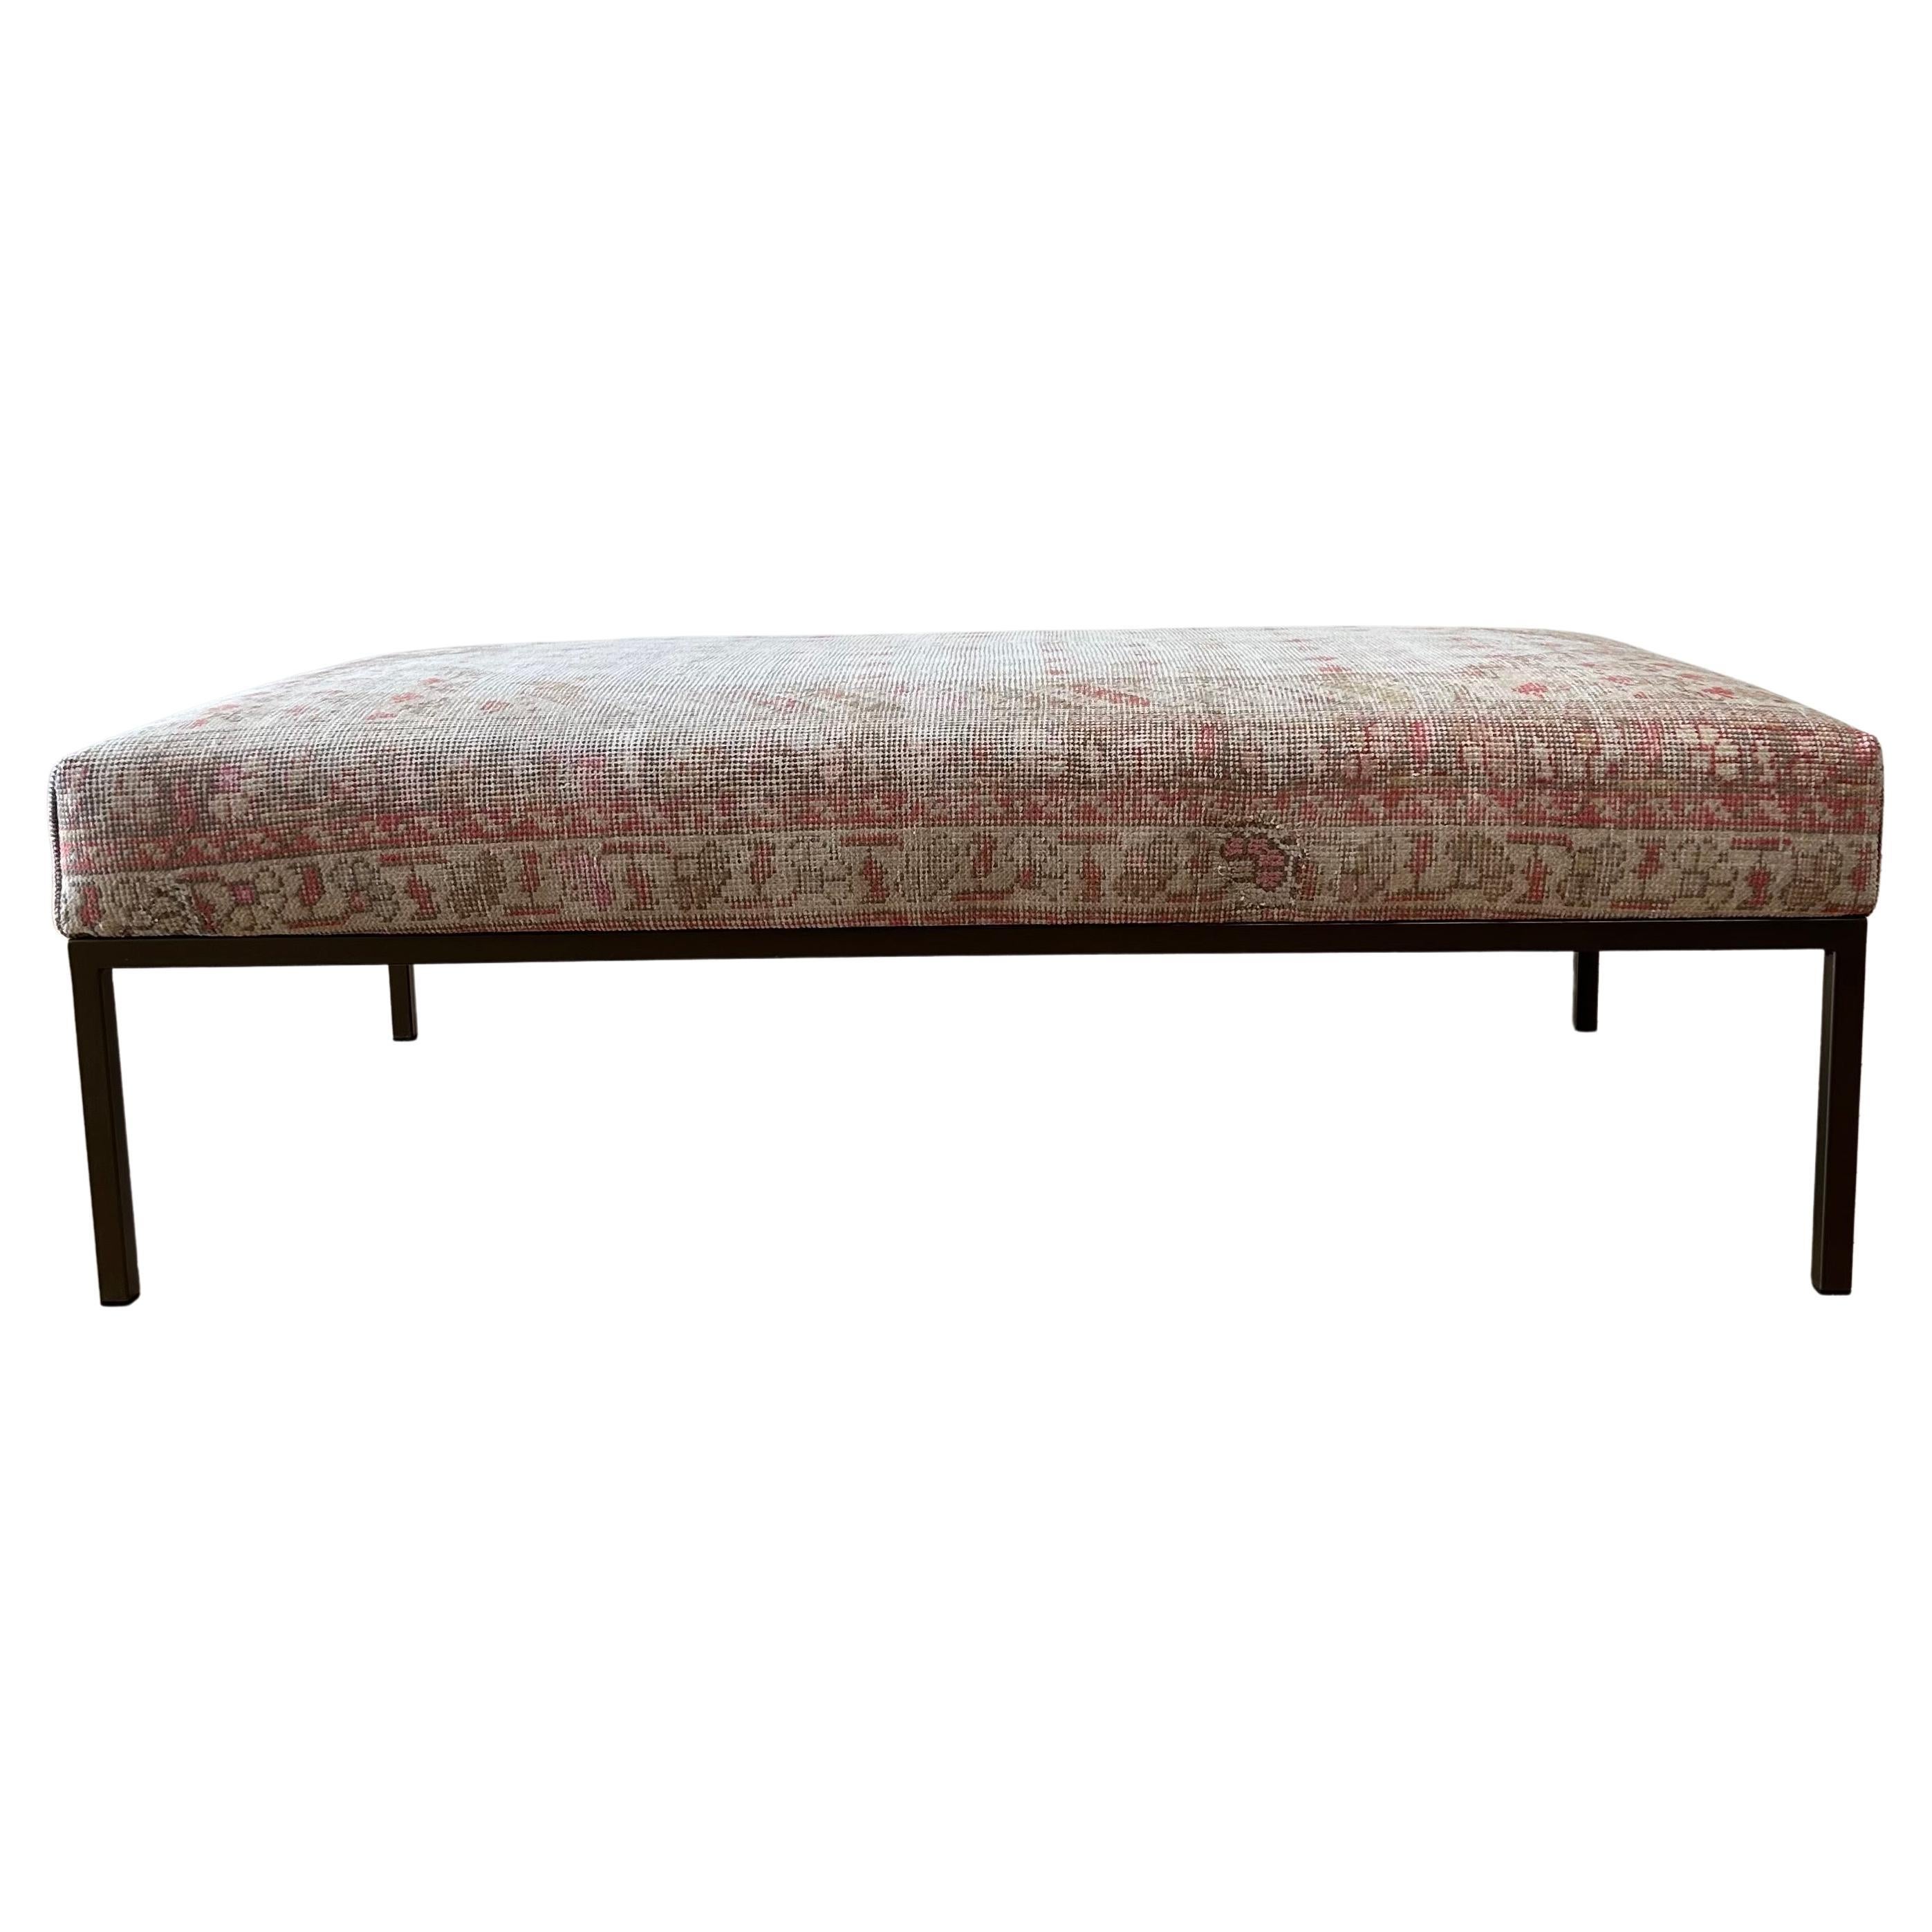 Custom Made Iron Base Upholstered Ottoman or Bench from Vintage Turkish Rug